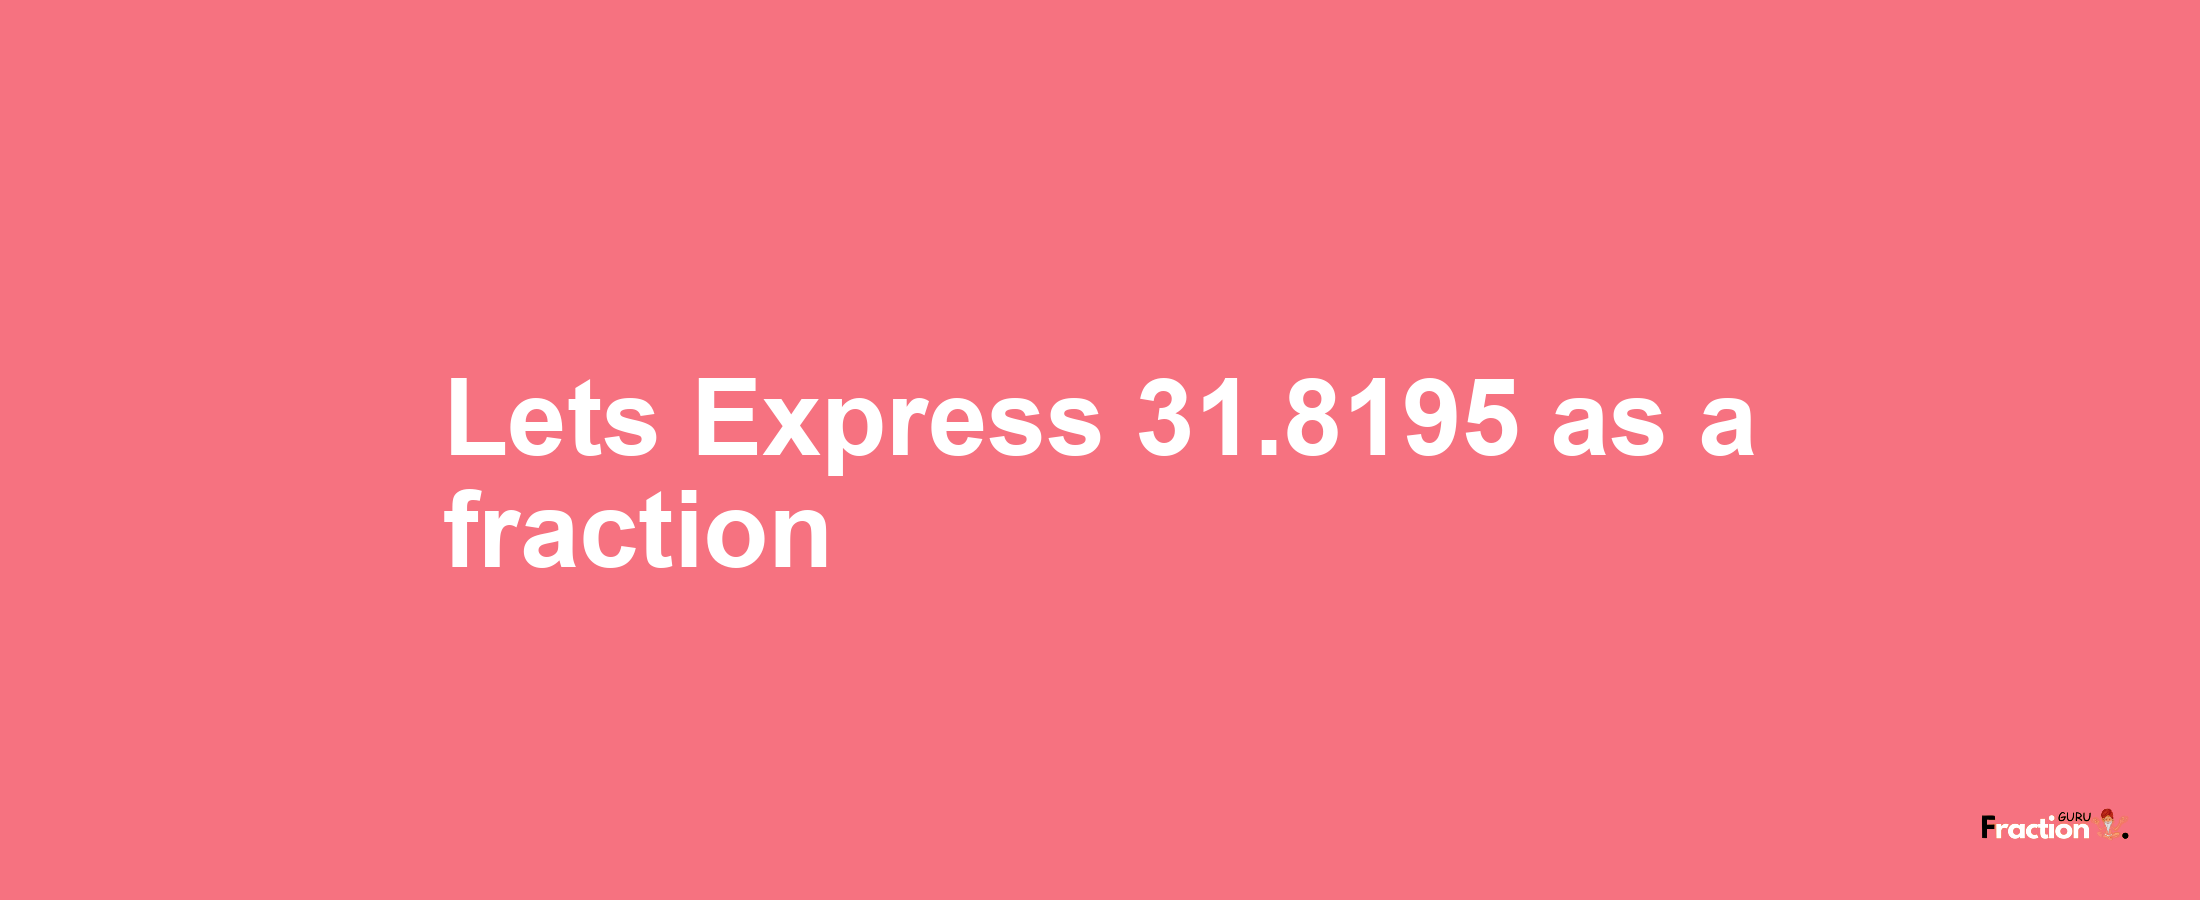 Lets Express 31.8195 as afraction